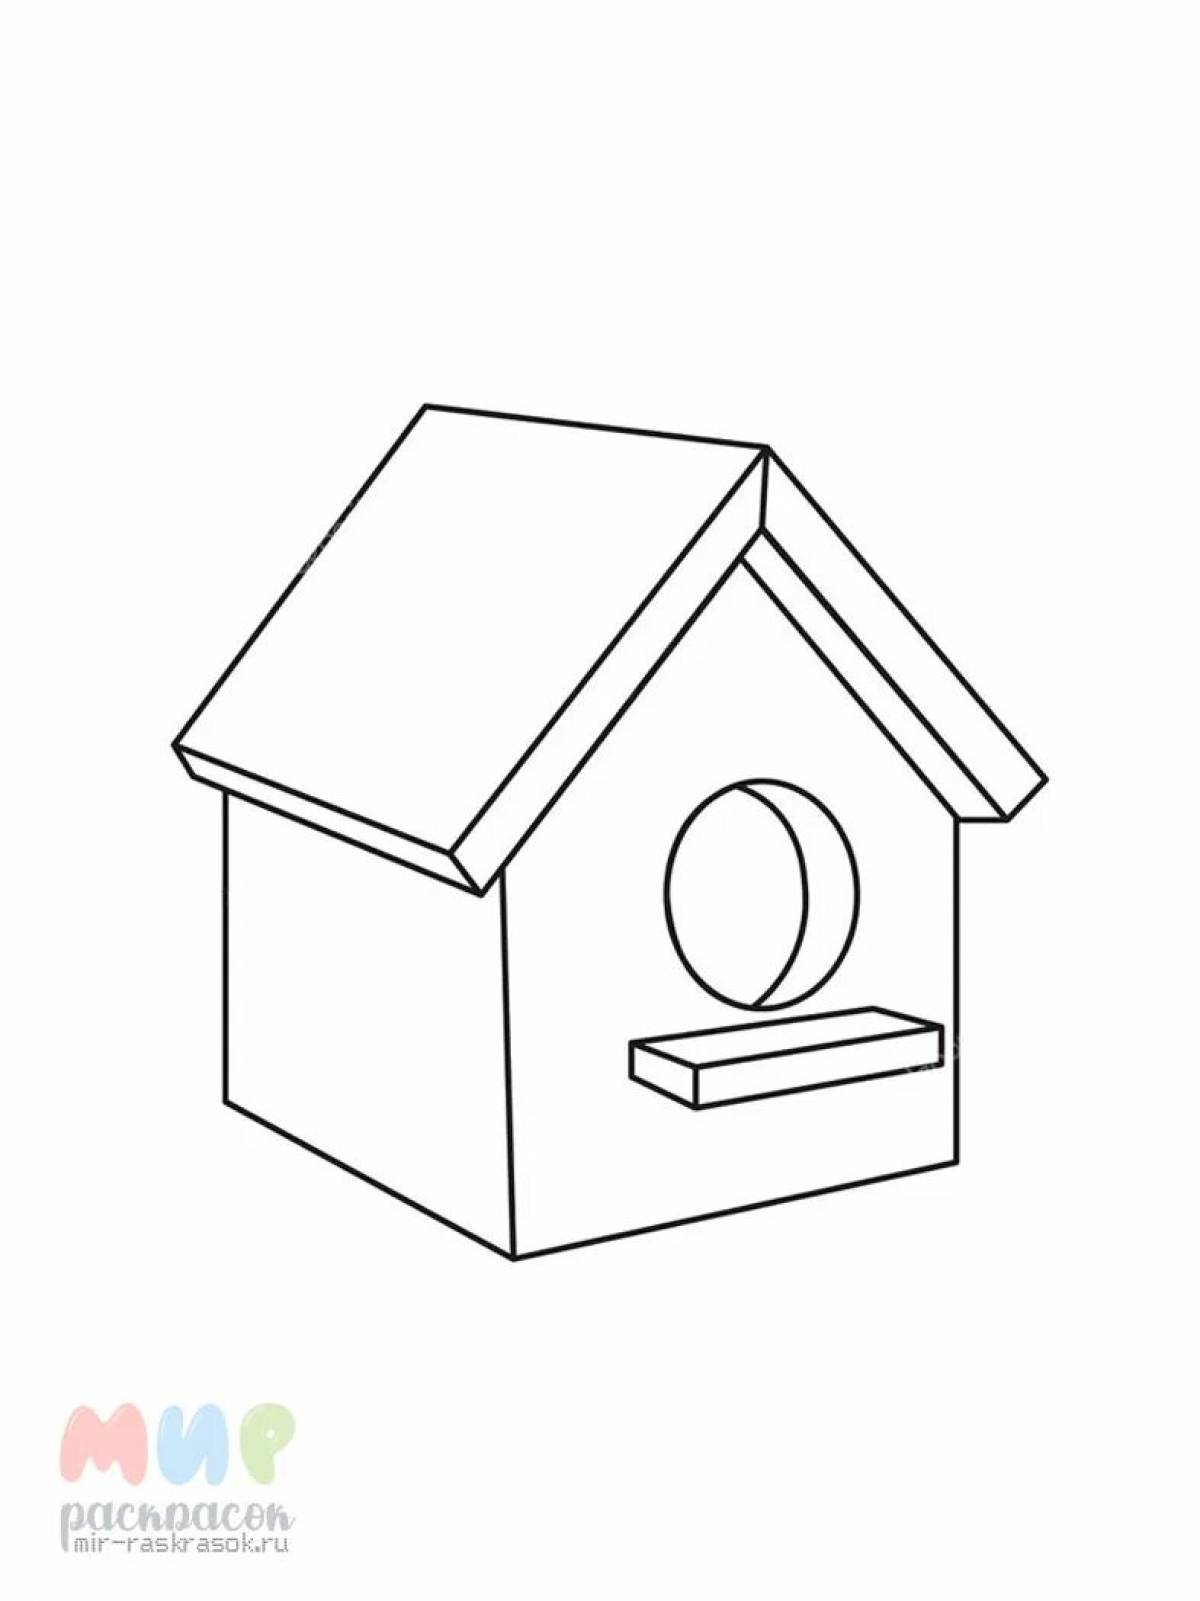 Elegant birdhouse coloring book for toddlers 3-4